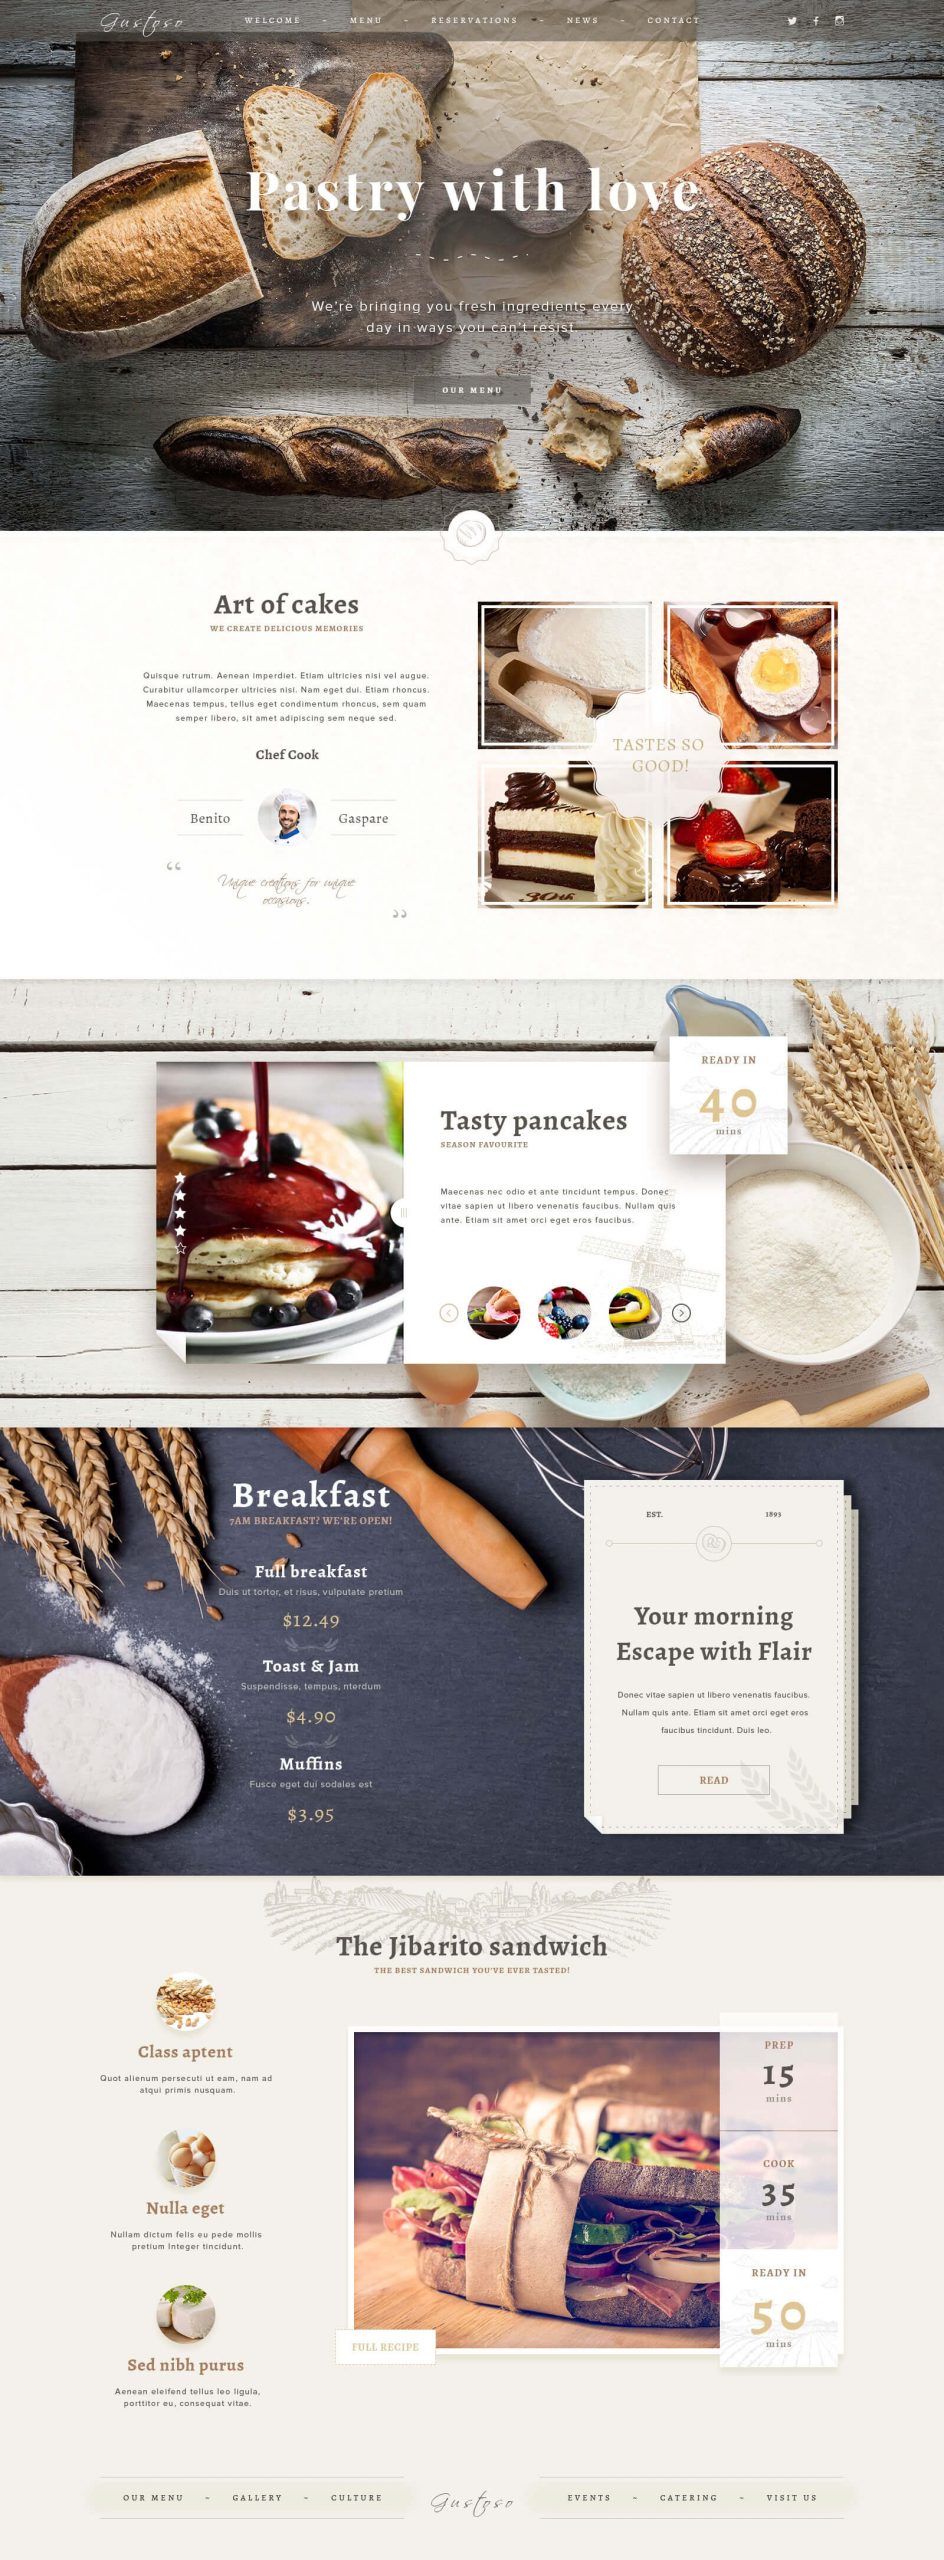 The Bakery Website - Free PSD Template